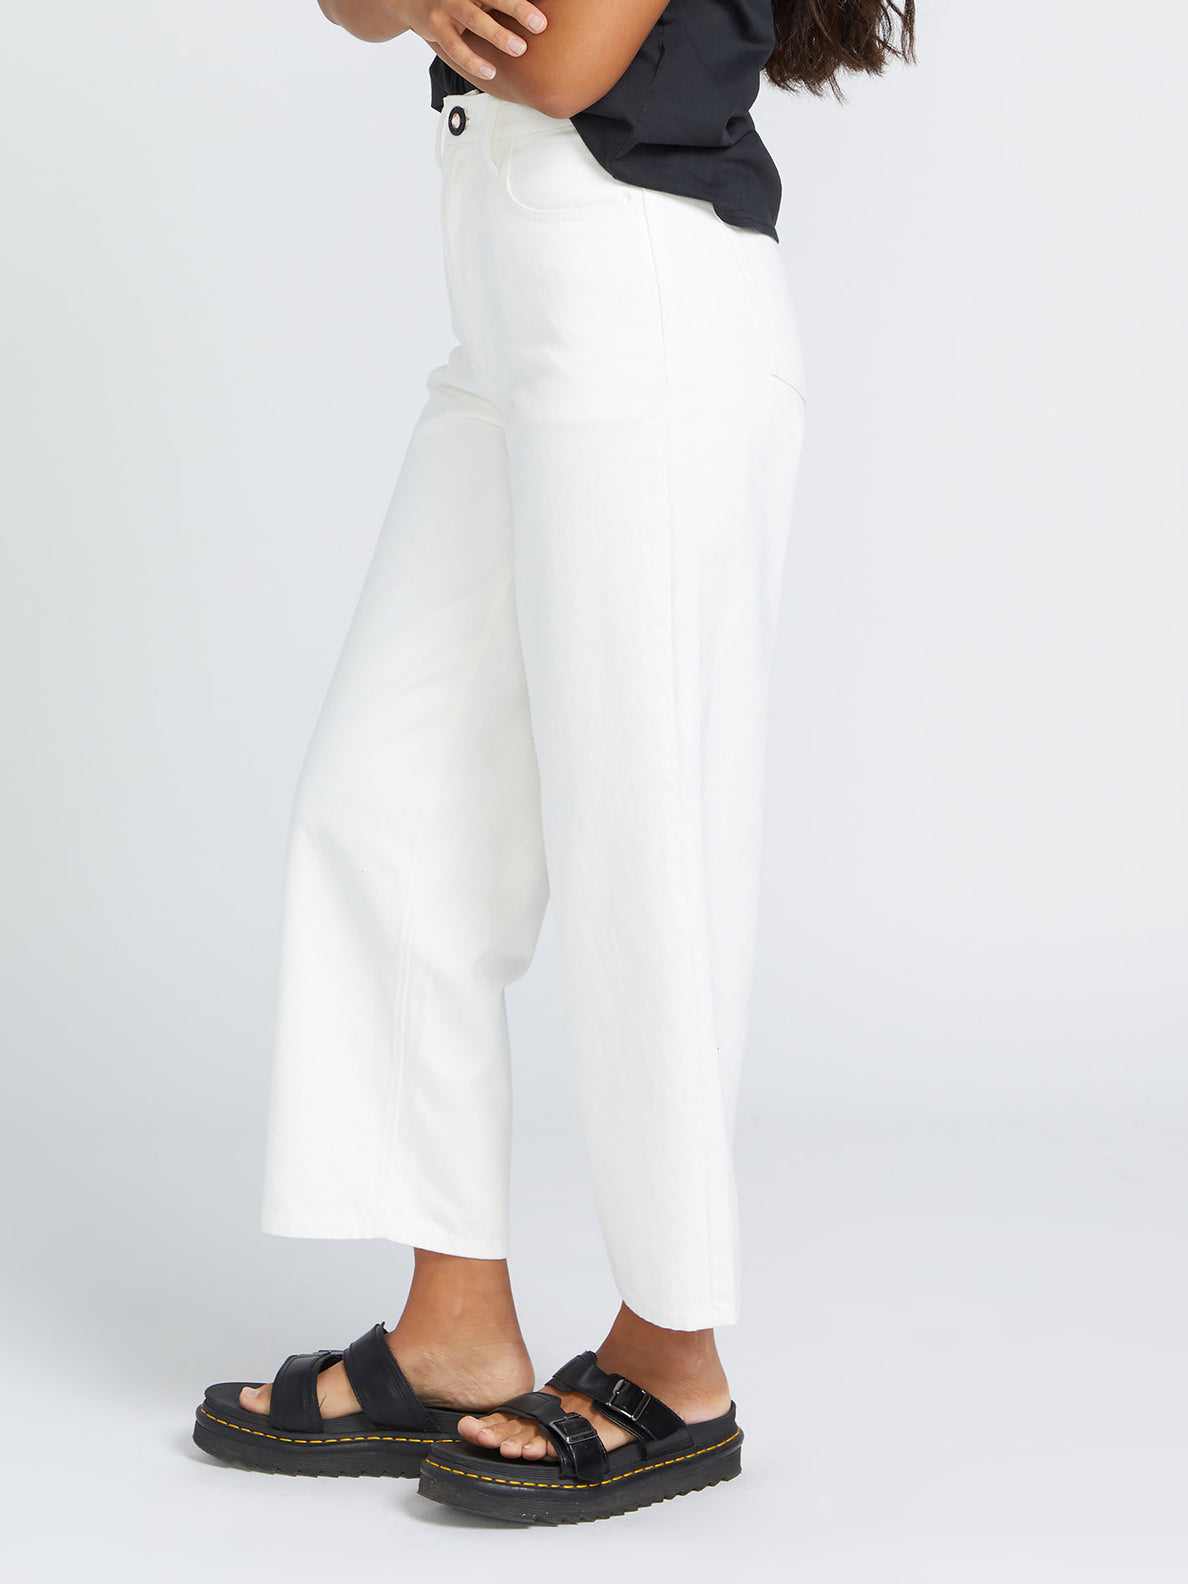 Womens Weellow Jeans - STAR WHITE